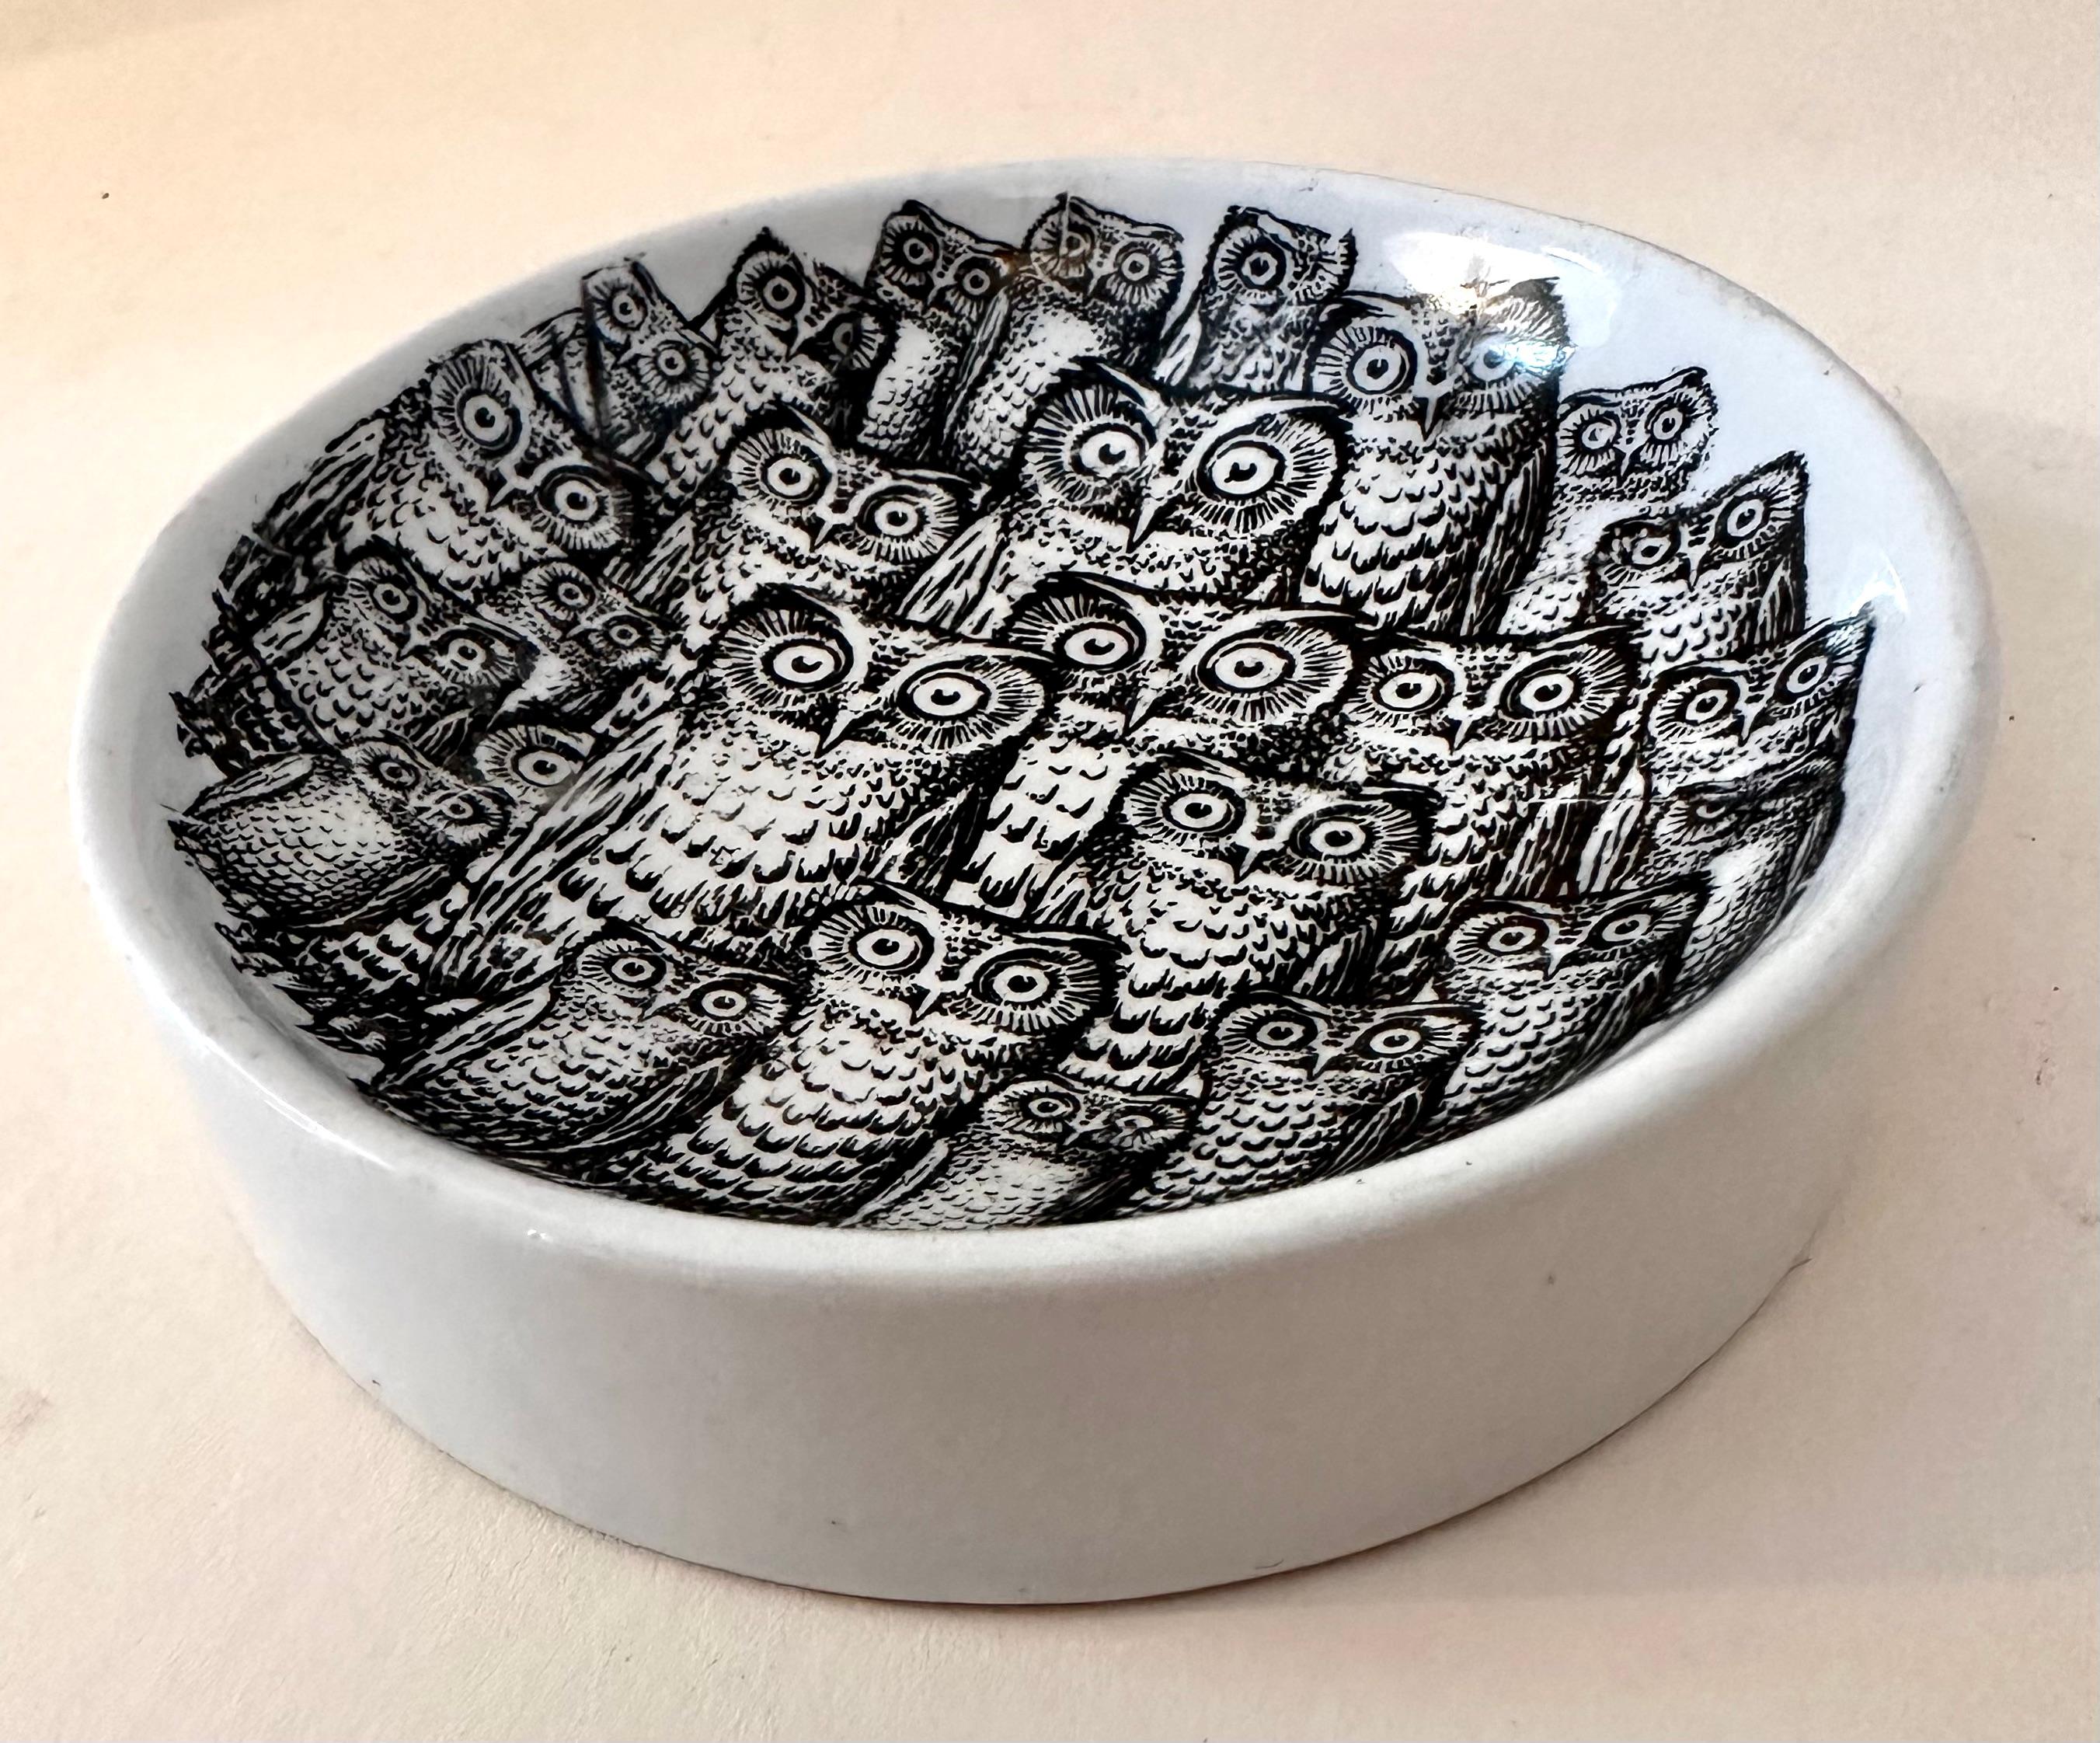 Porcelain shallow 5 inch bowl with Fornasetti Owls. While the piece is not signed we expect it is Fornasetti. A beautiful piece.

A wonderful bowl for decoration or to gather change or the keys at the front door.

Perfect house warming or